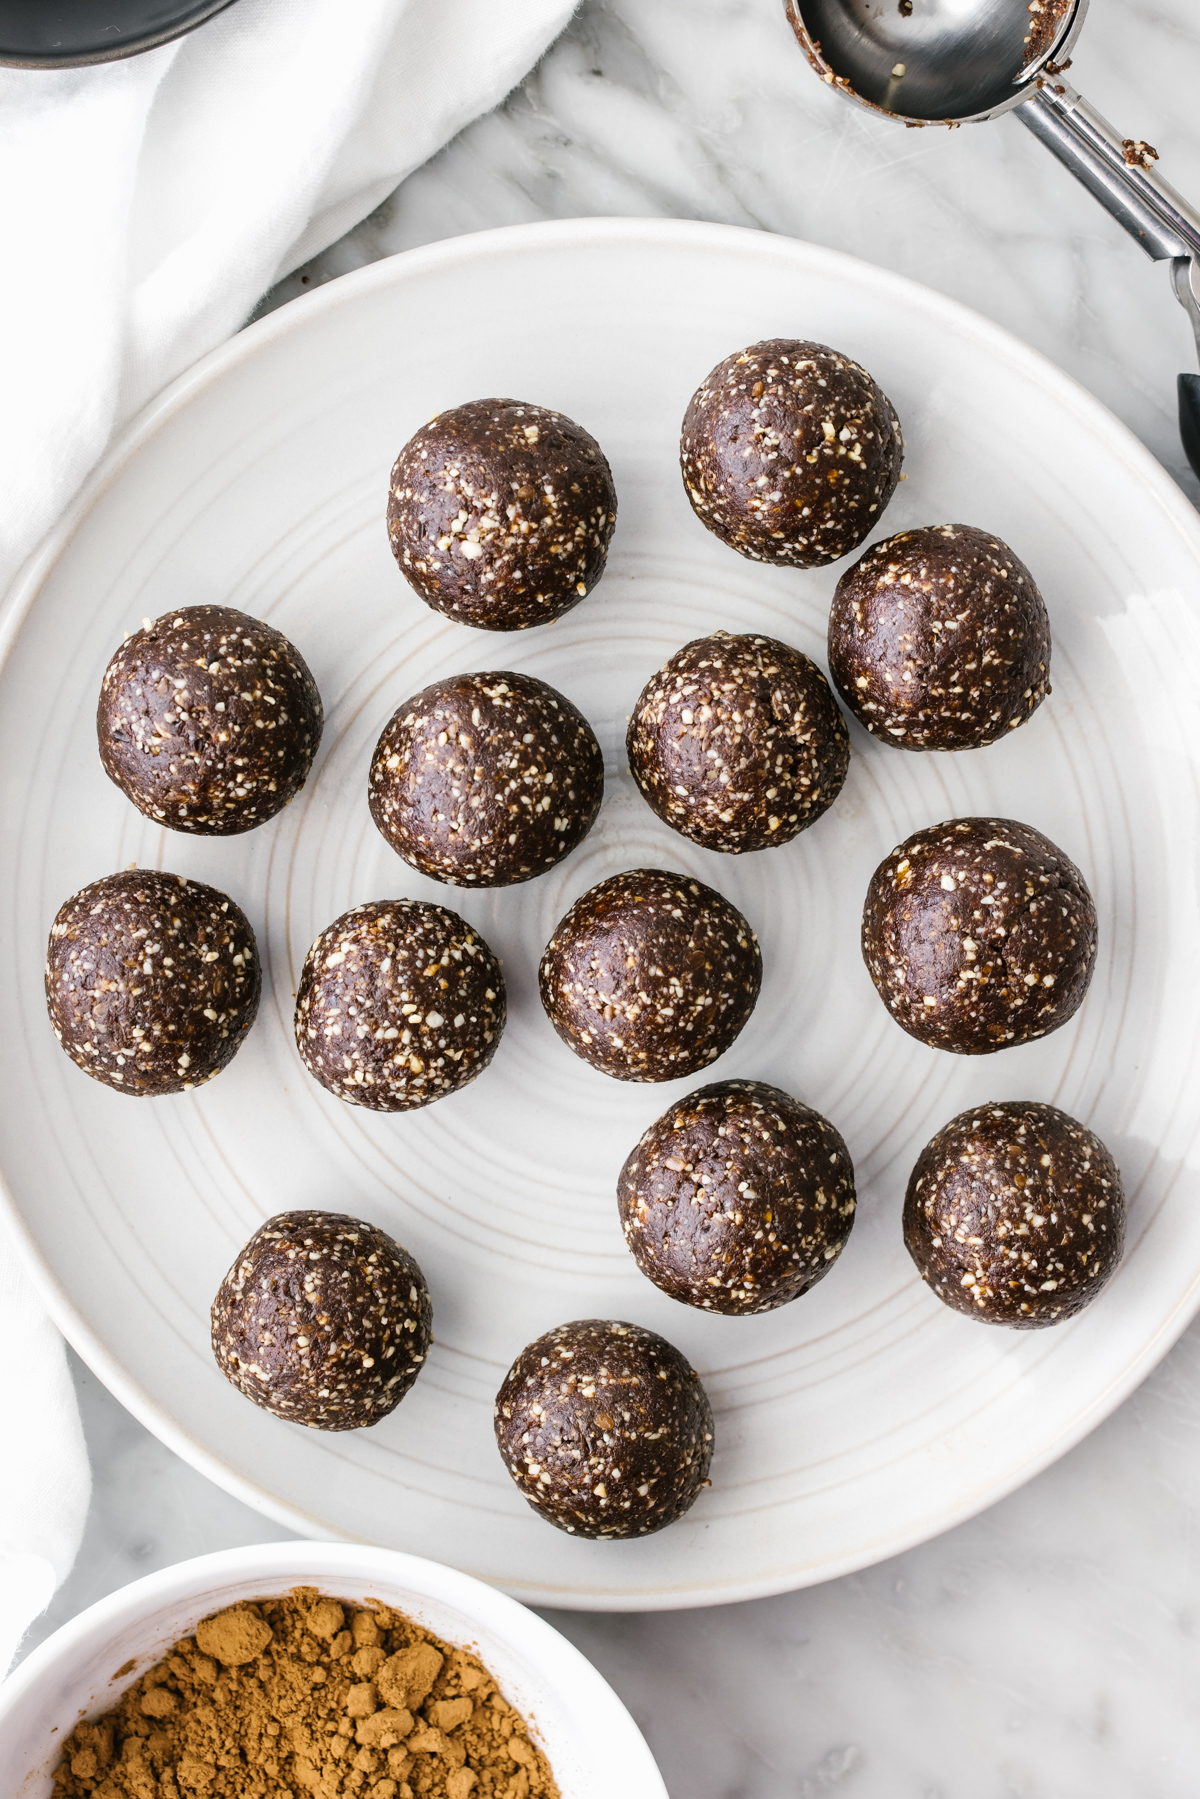 Mint chocolate energy balls on a plate.